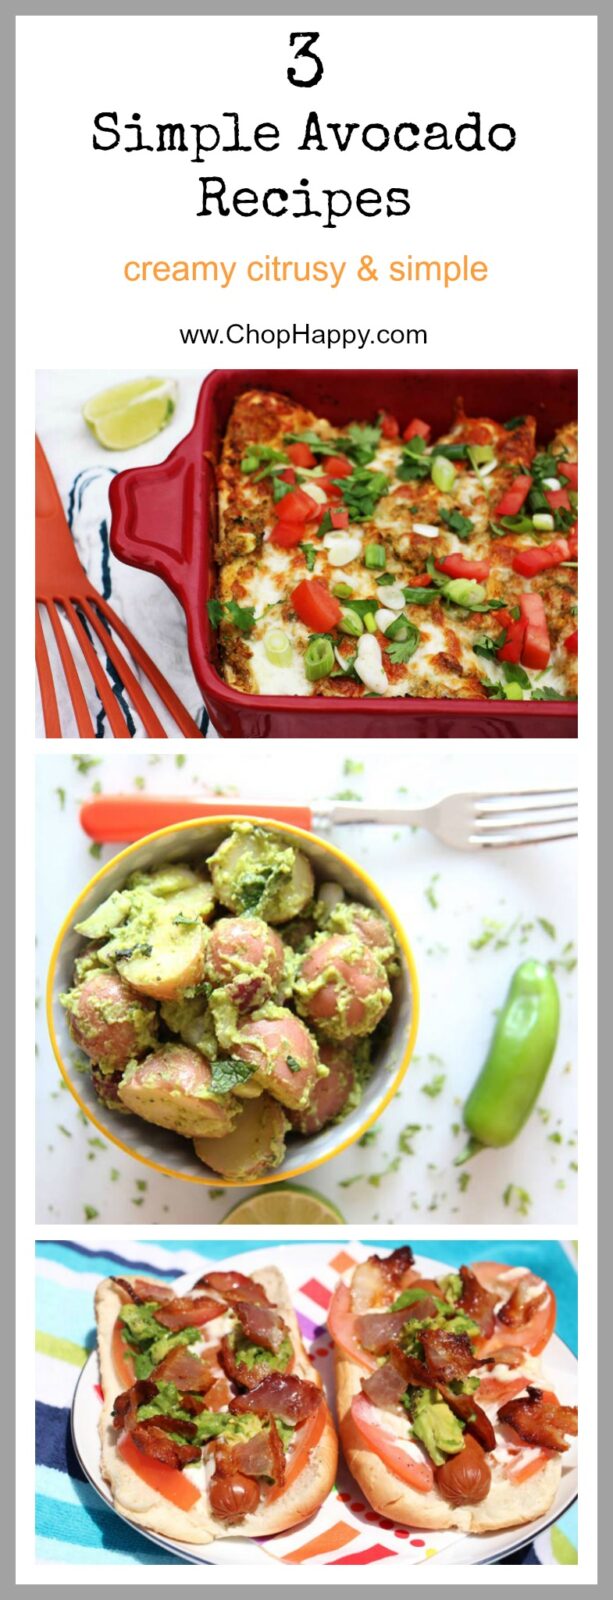 3 Recipes to Satisfy Your Avocado Craving- Easy creamy and smiles for all that eat these recipes. I love avocado because it adds a yummy citrus flavor to everything you add it to. Put avocado in potato salad, enchiladas, or on a hot dog. Perefect dinner. www.ChopHappy.com